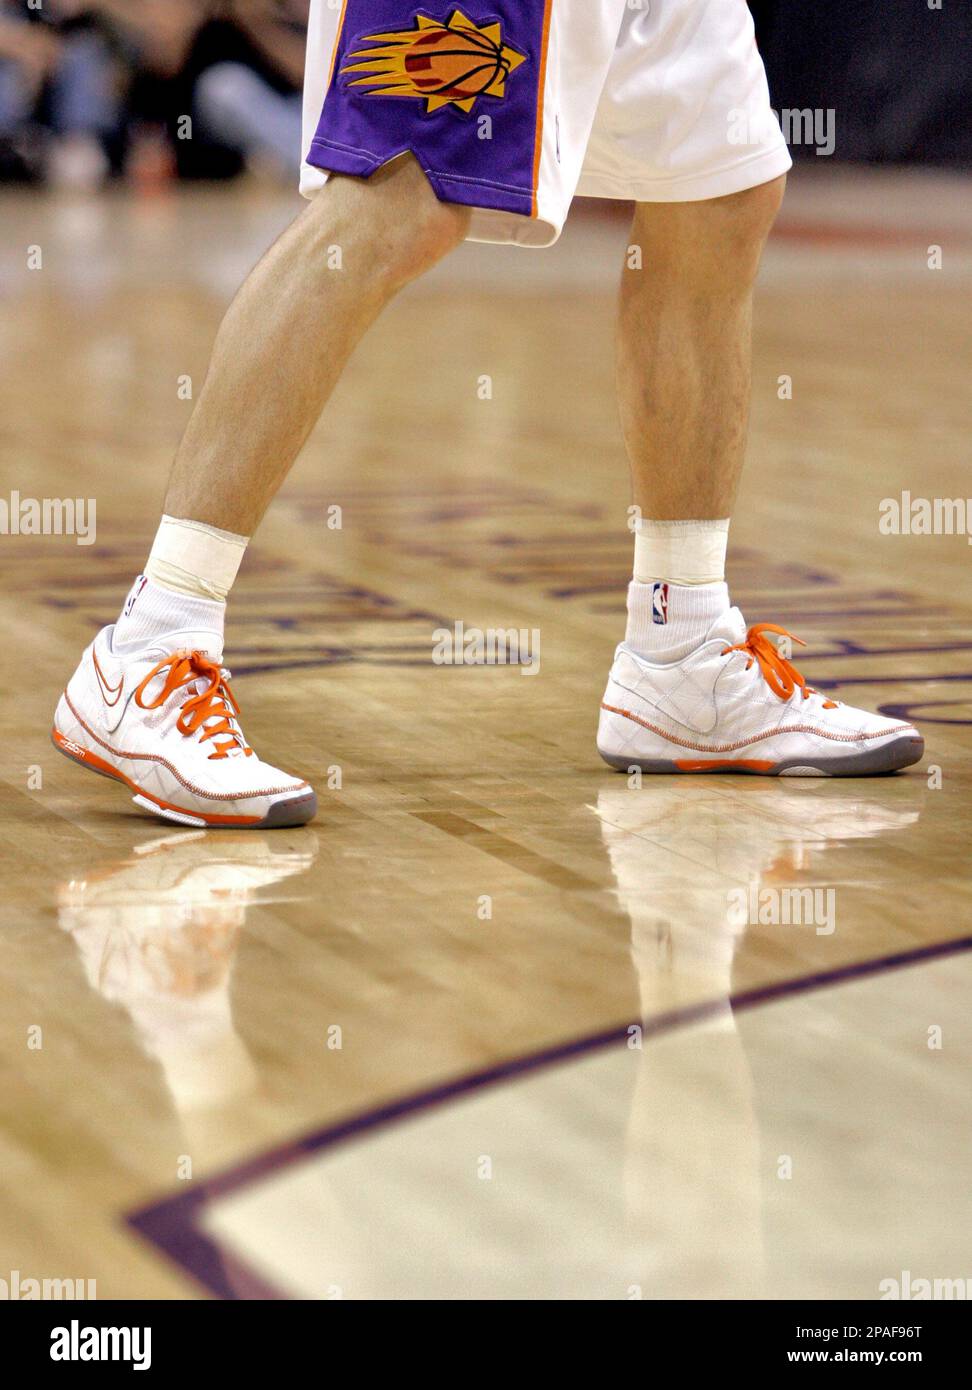 Phoenix Suns guard Steve Nash's shoes are shown during a basketball game  against the Dallas Mavericks Thursday, Feb. 14, 2008 in Phoenix. Shoe  manufacturer Nike and Steve Nash are releasing the new